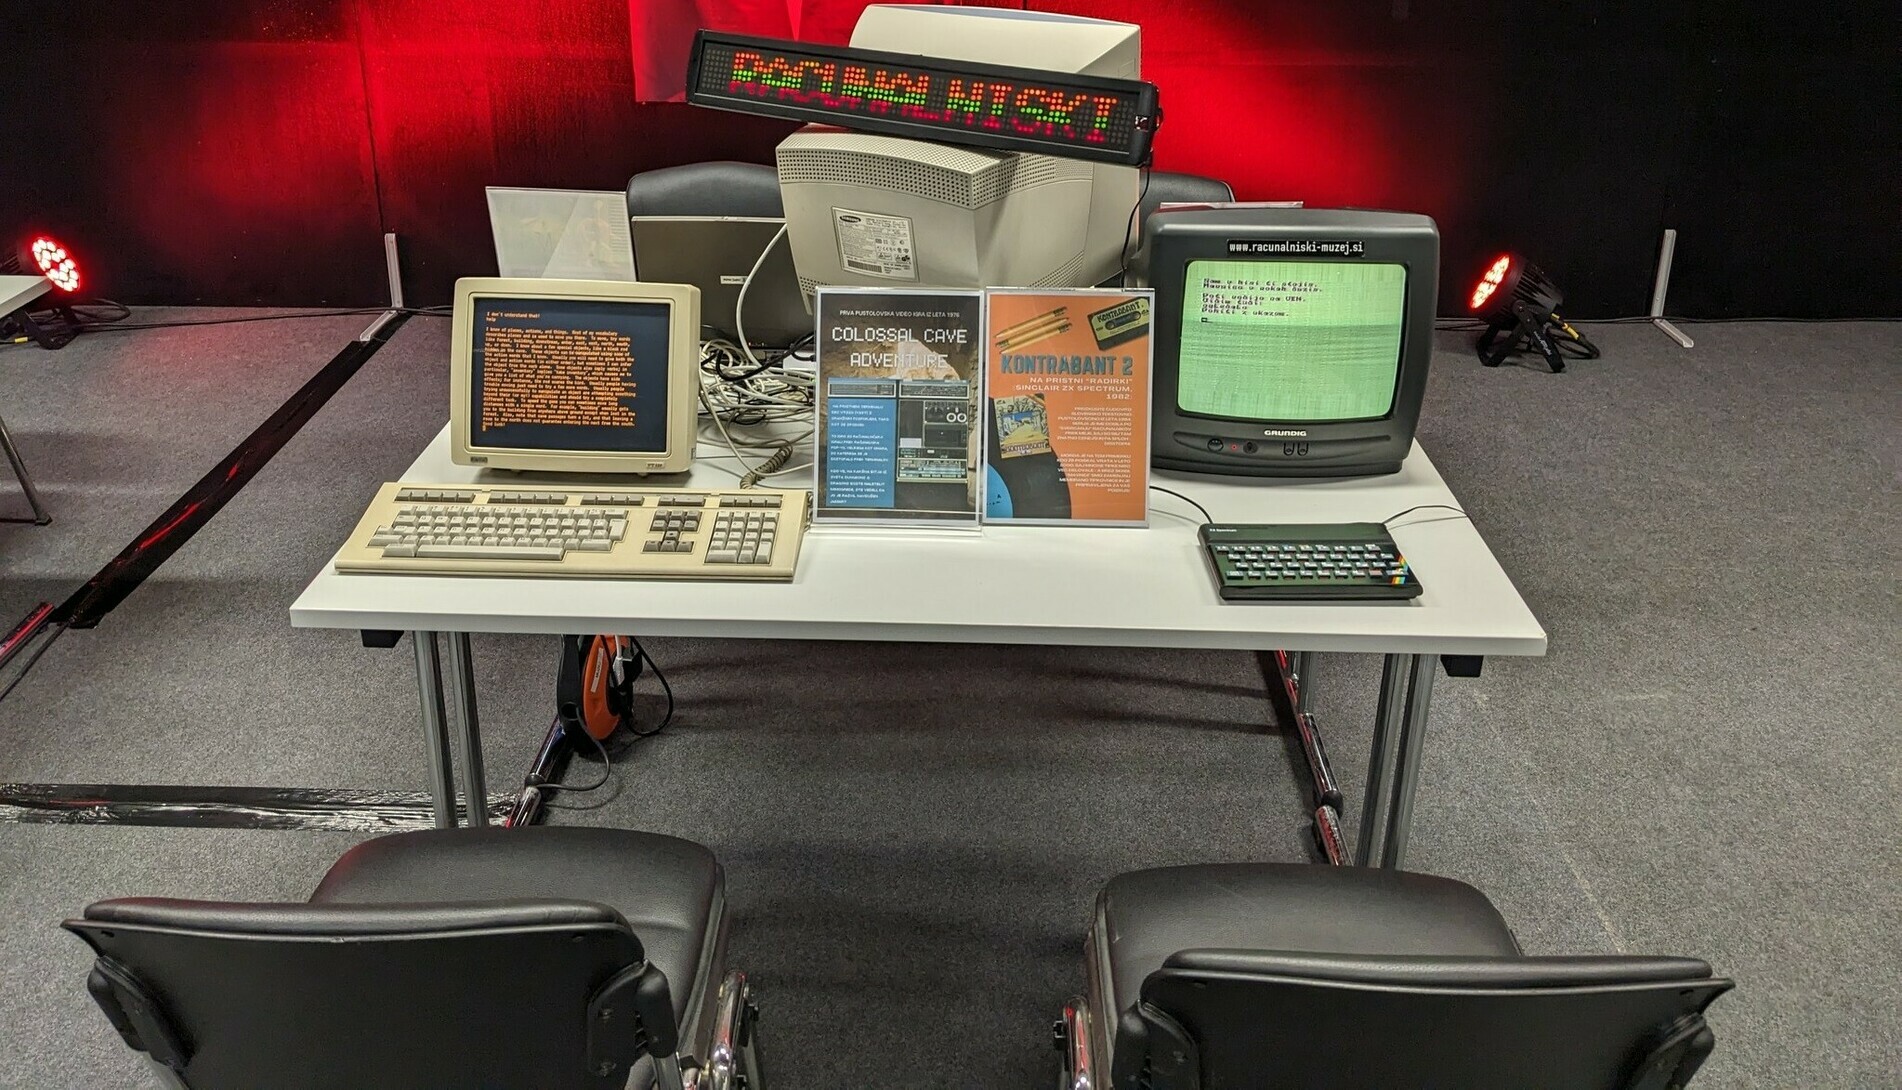 Two retro computers on a table.